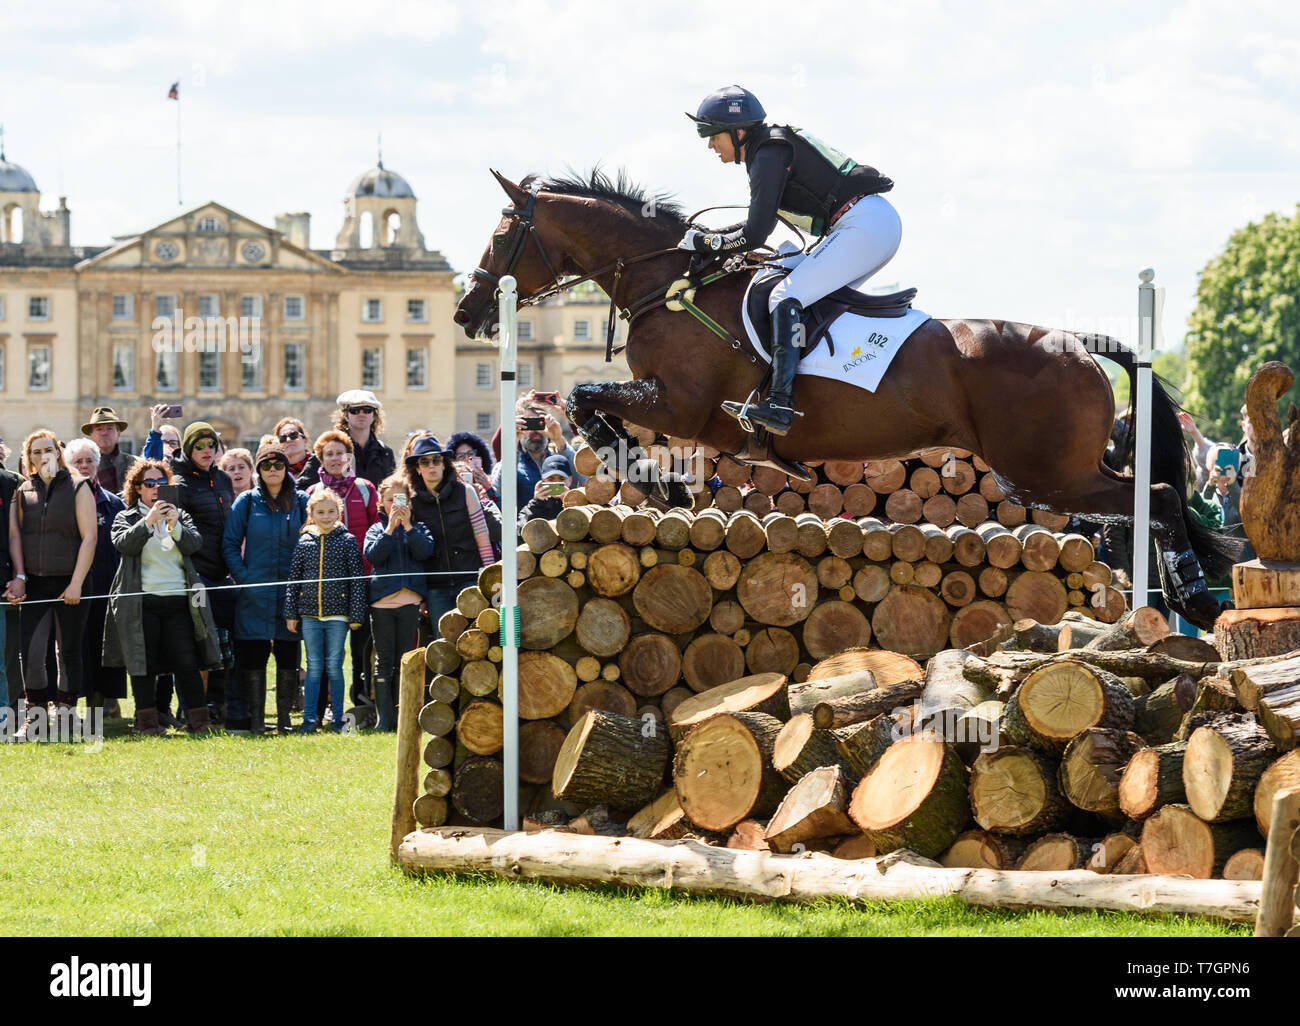 Piggy French and VANIR KAMIRA during the cross country phase of the Mitsubishi Motors Badminton Horse Trials, May 2019 Stock Photo